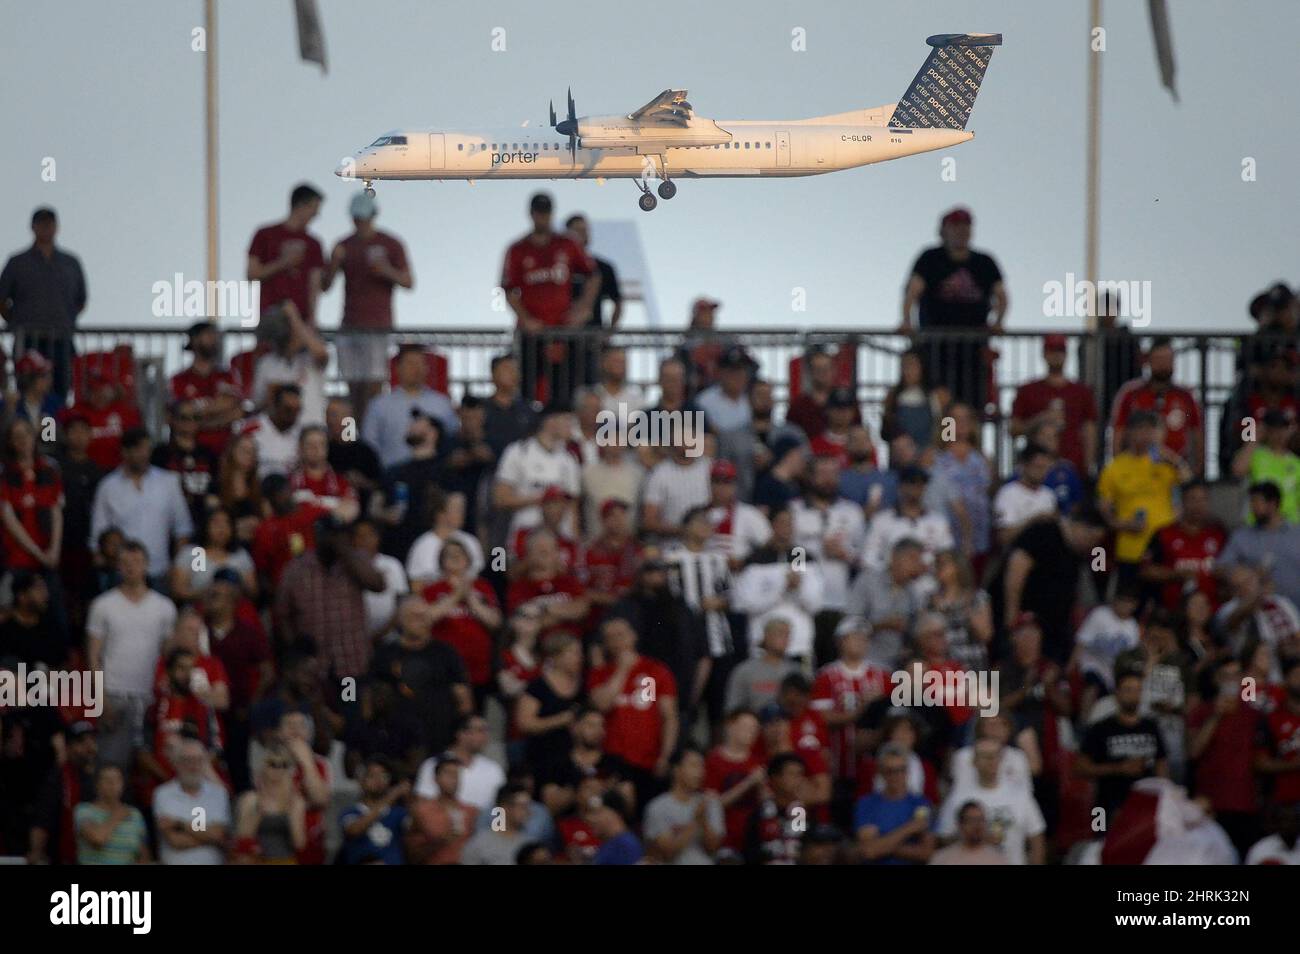 A Porter aircraft on final approach is seen as fans watch first half MLS Soccer action between the Toronto FC and the New York Red Bulls, in Toronto on Wednesday, July 17, 2019. THE CANADIAN PRESS/Nathan Denette Stock Photo